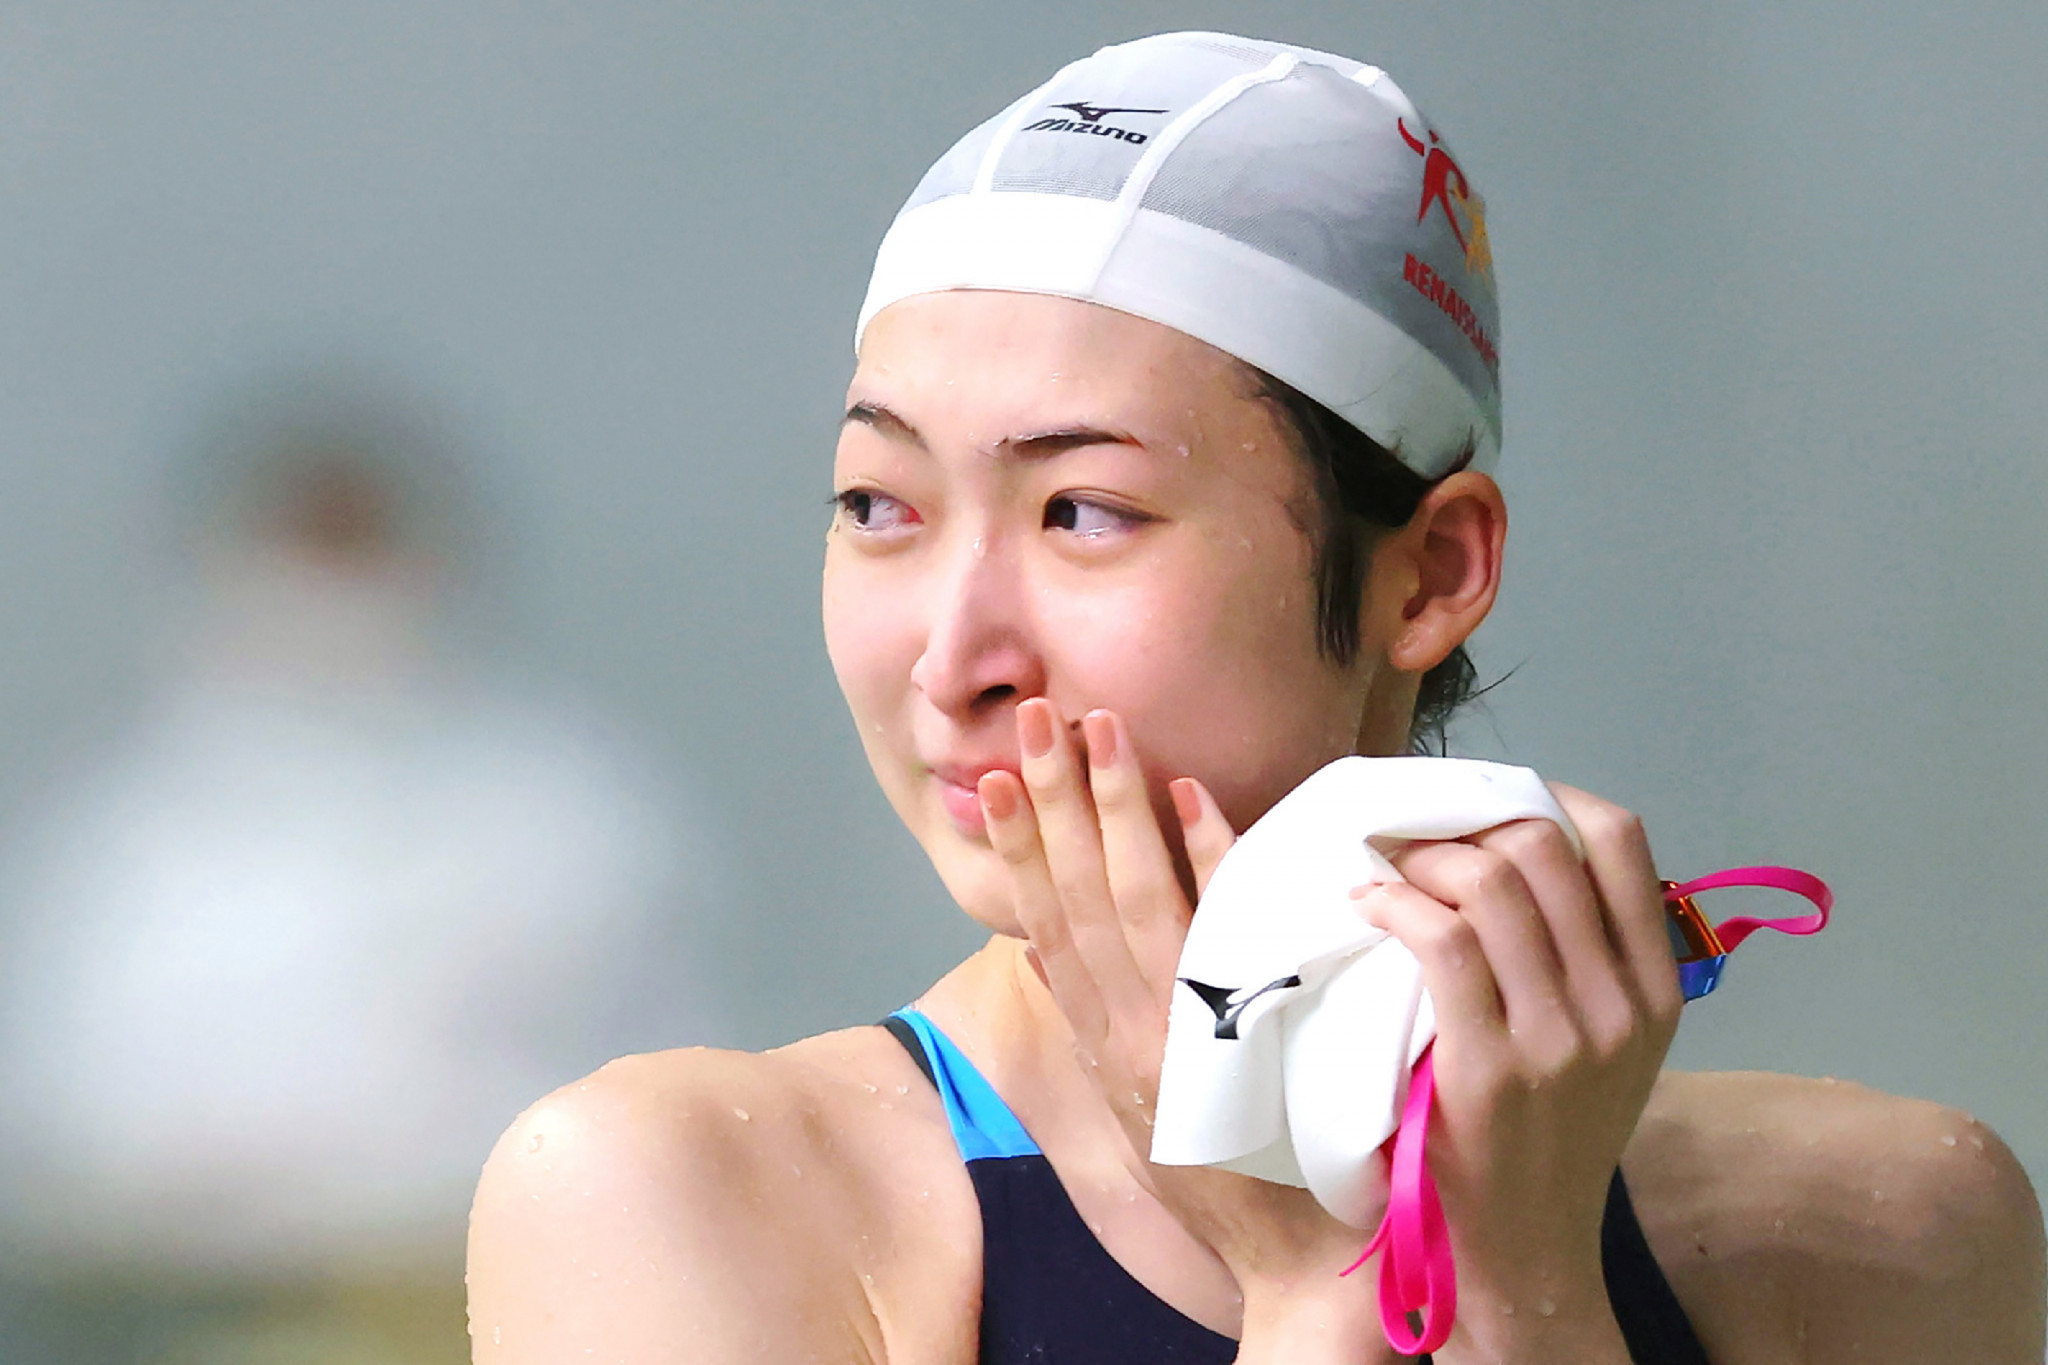 Asian Games champion Ikee makes competitive return after leukemia recovery